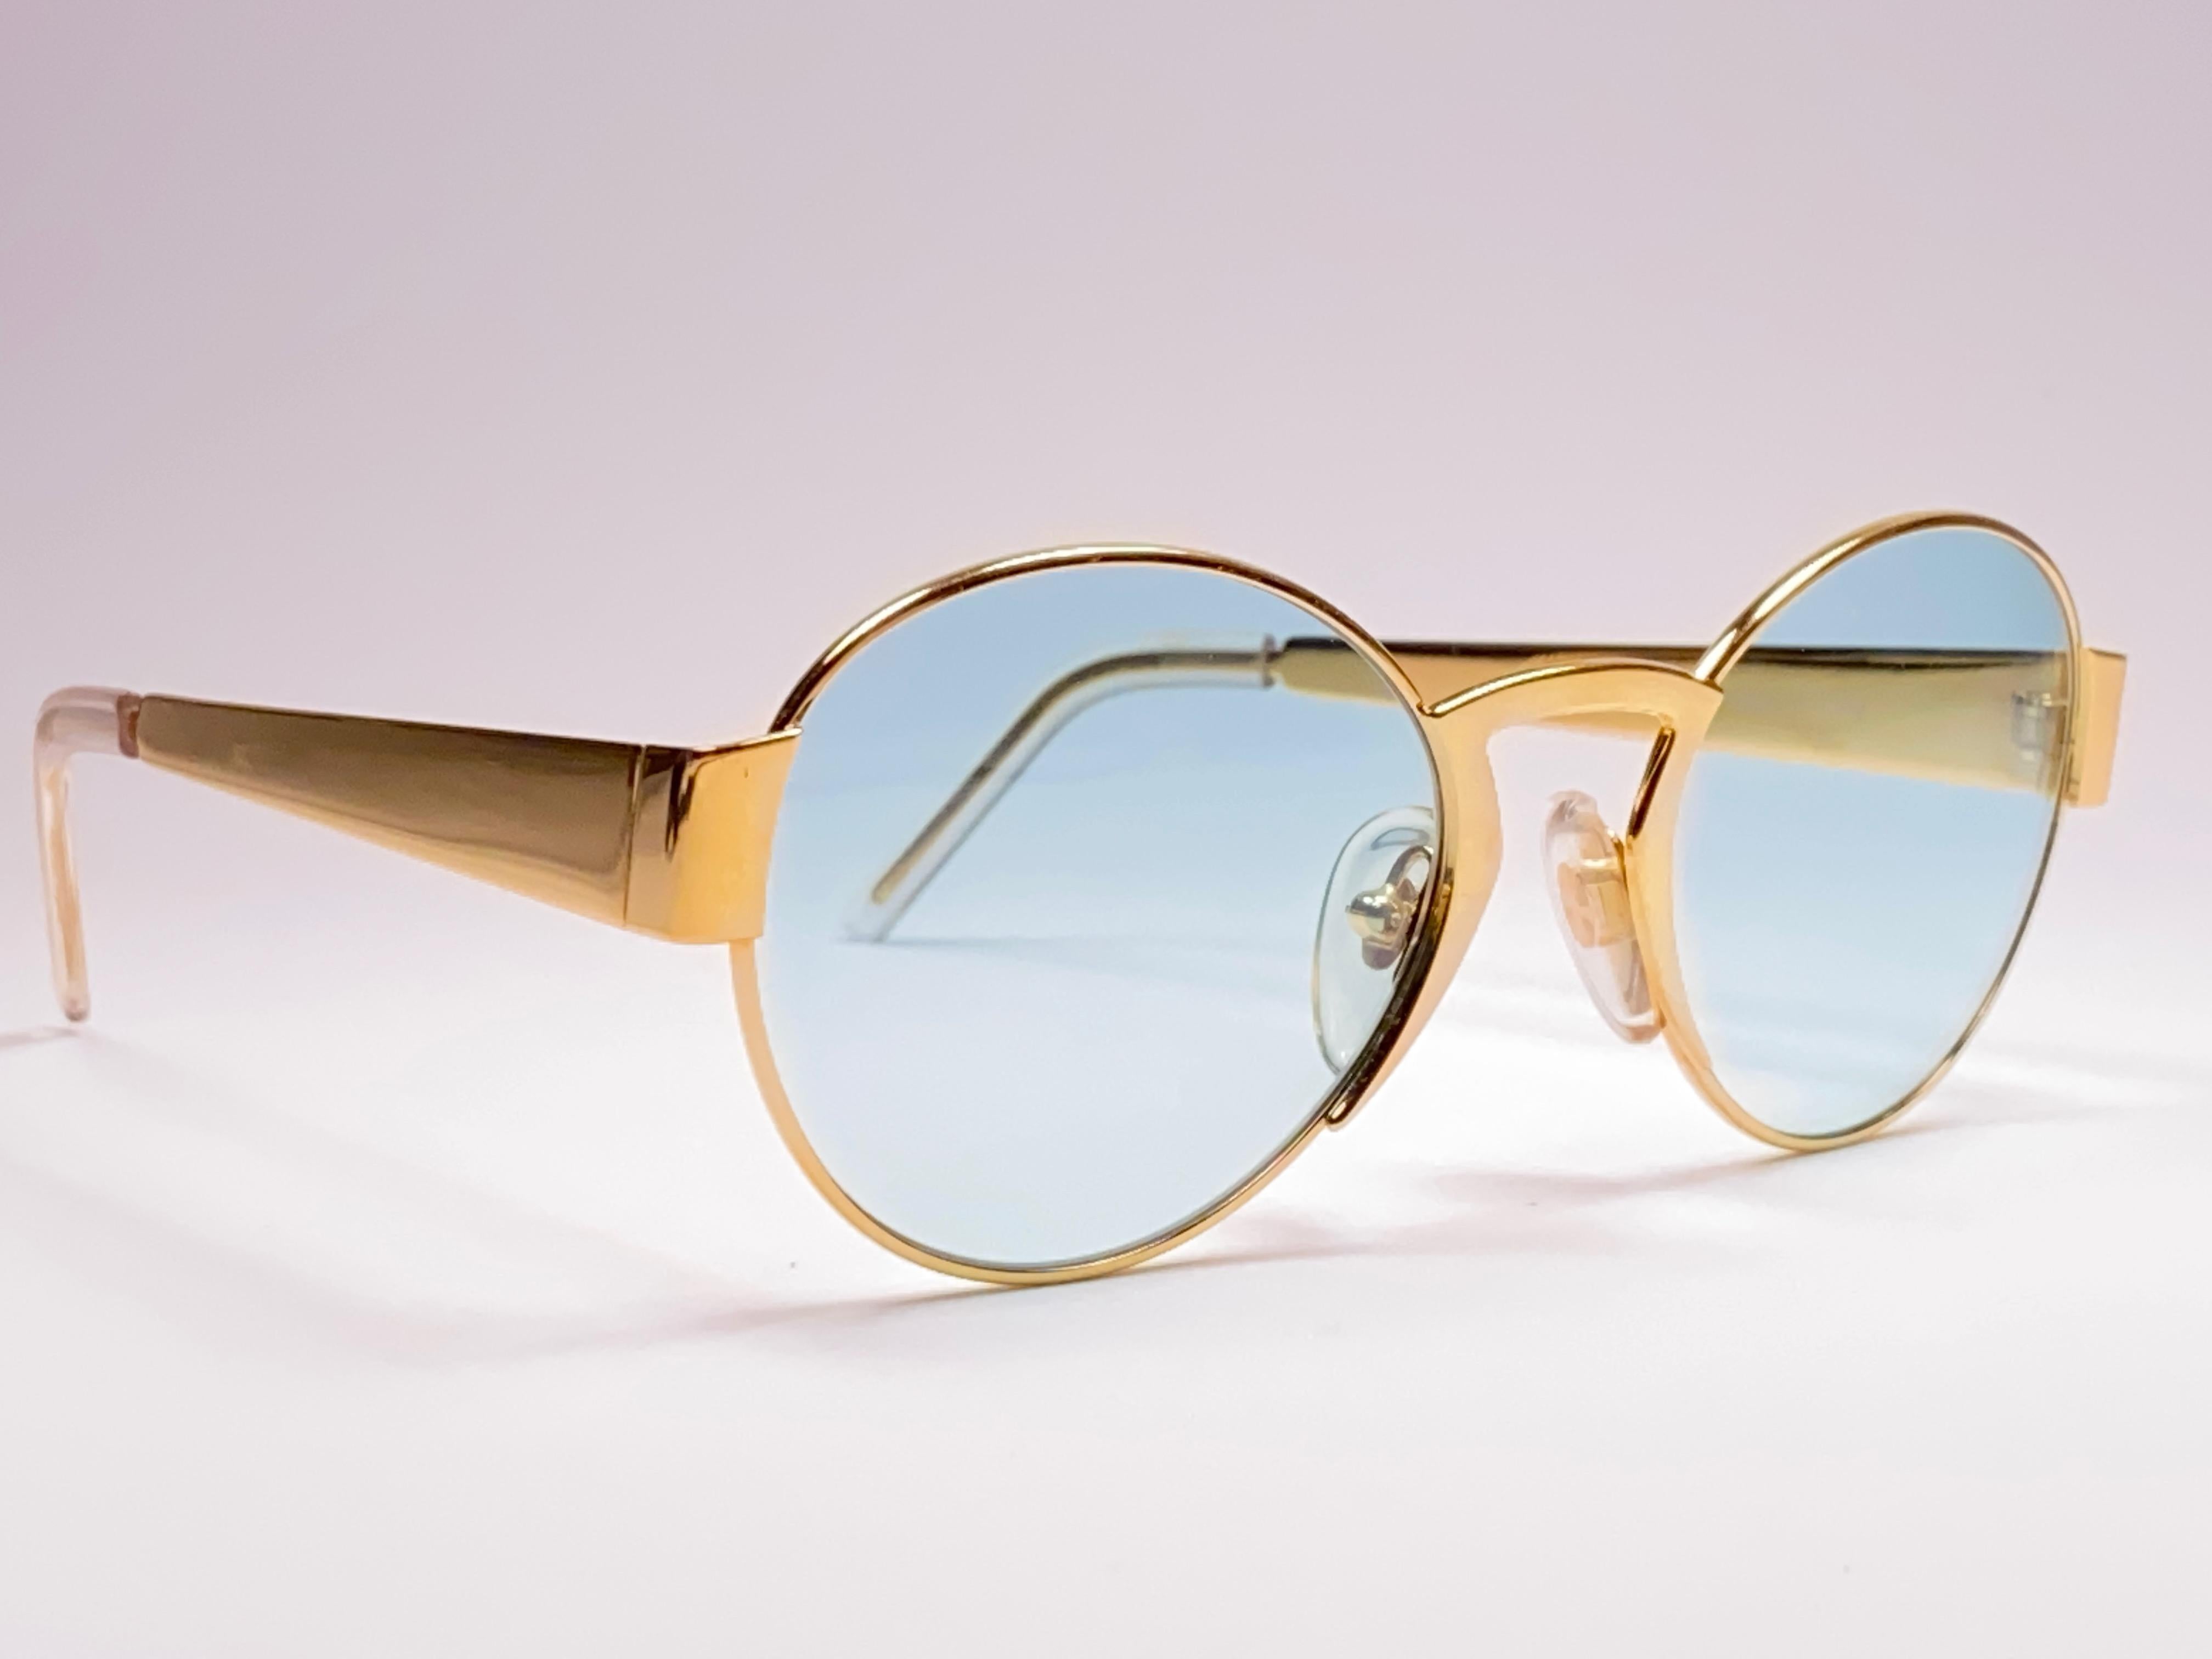 Women's or Men's New Vintage Moschino By Persol M08 Frame Medium Round Gold Sunglasses 